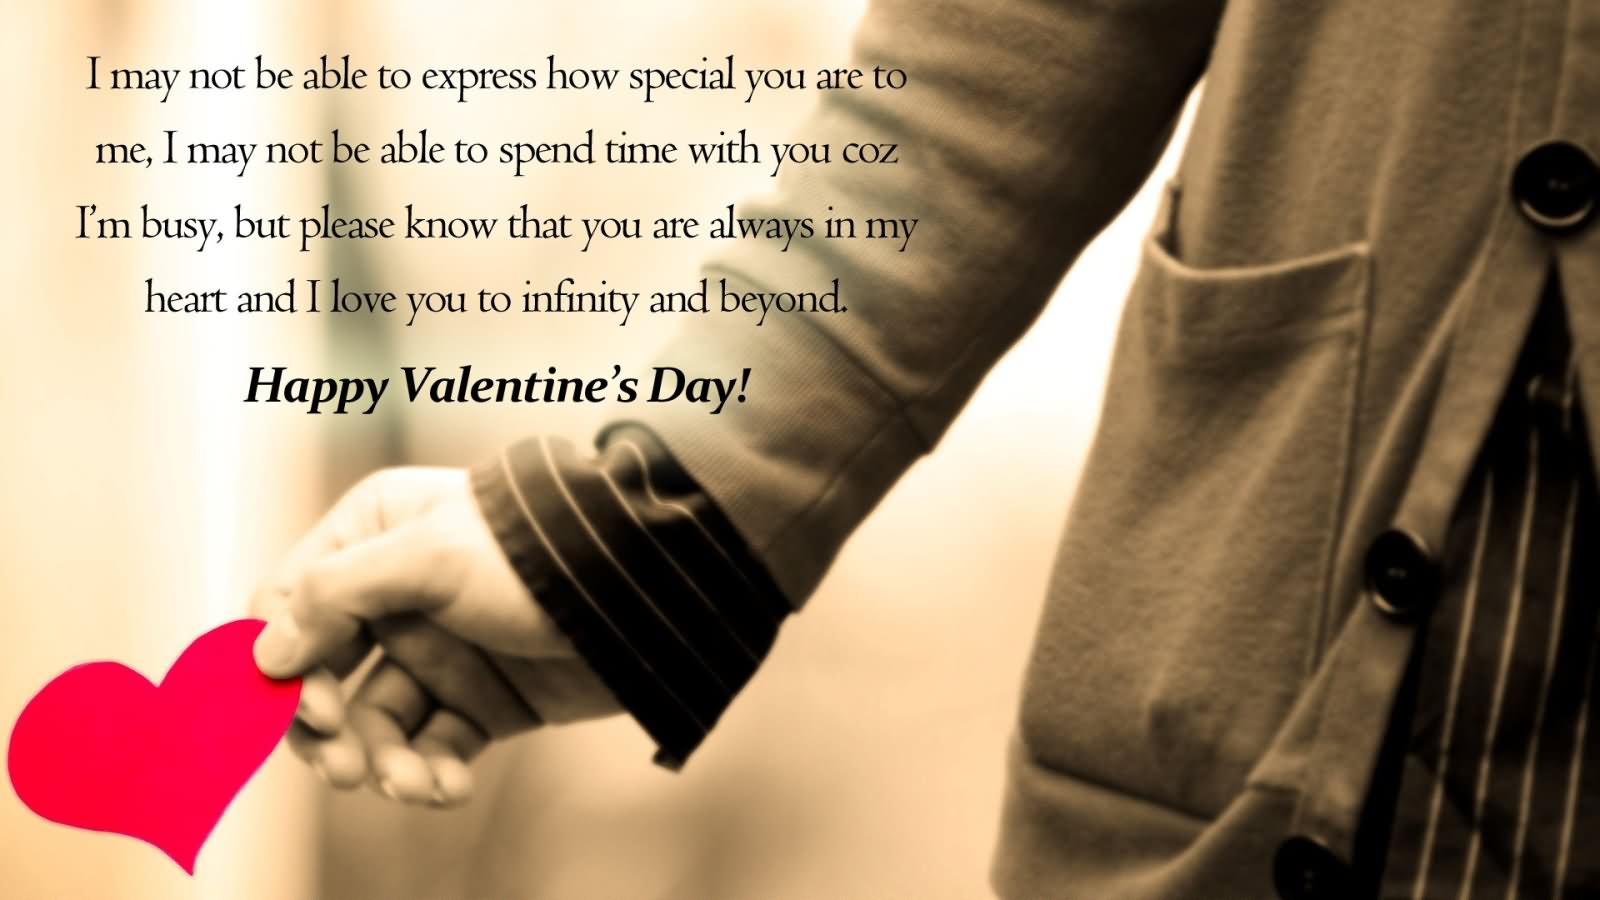 I may not be able to express how special you are to me,i may not be able to spend time with you coz .........